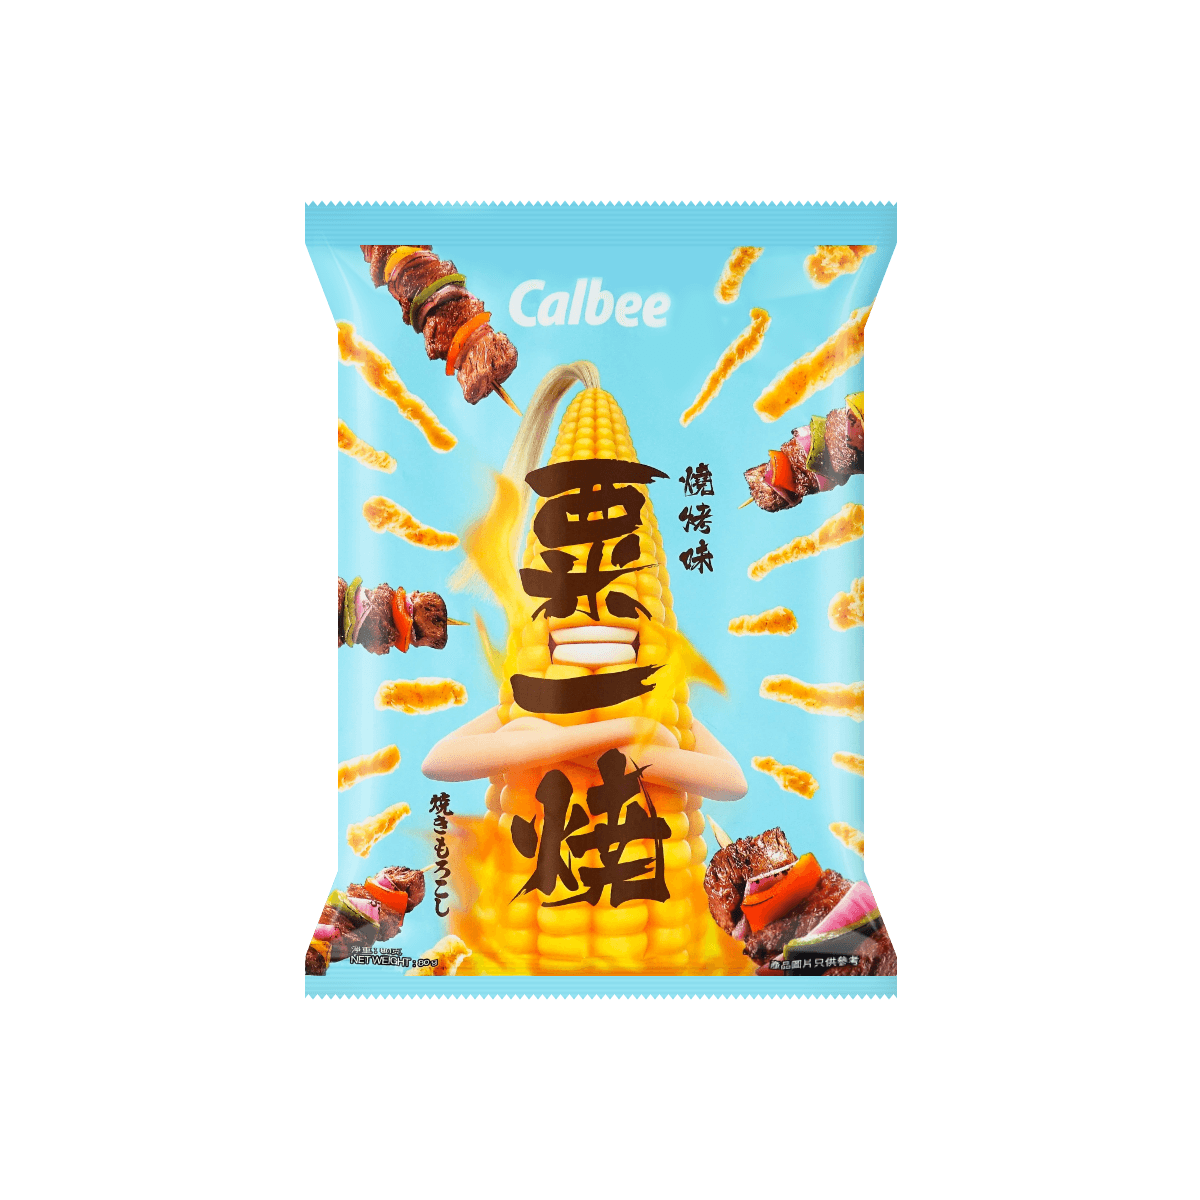 A snack package: a big corn character with a pony tail and crossed arms and maybe some flames? Crunchy corn bites floating around alongside illustrations of kabobs with meat and veggies.